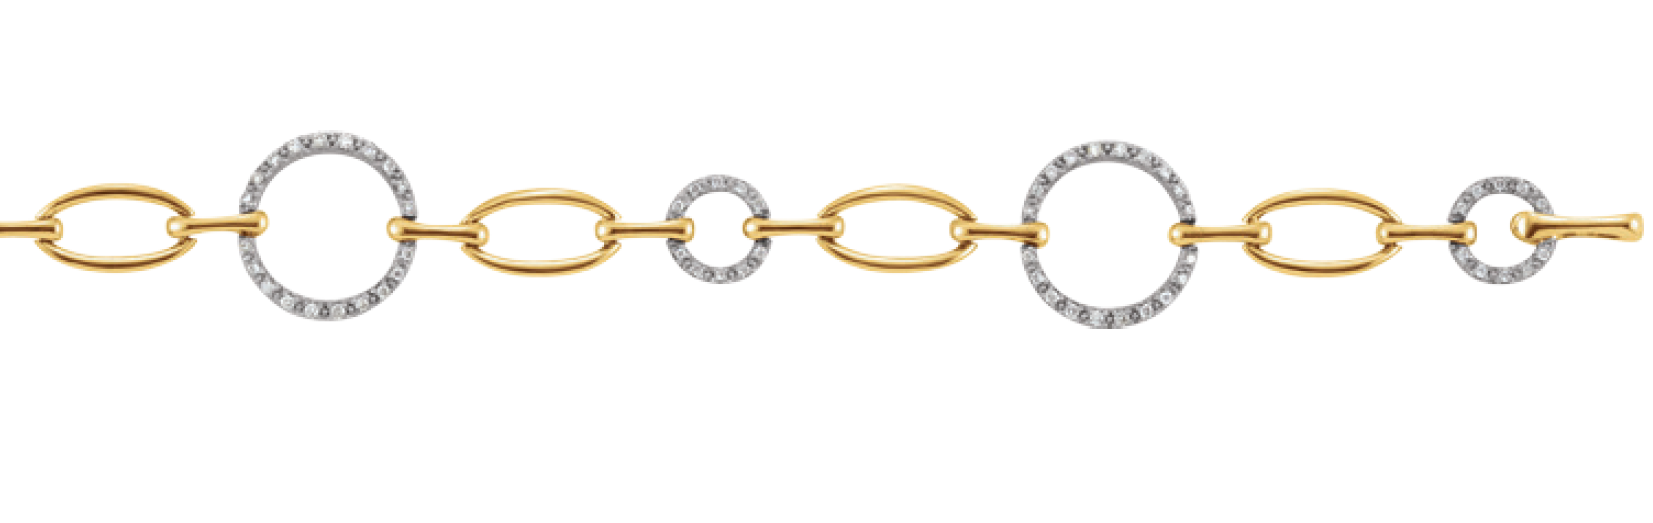 Two-Tone Diamond Bracelet, 14k Yellow and White Gold, 7.25" (.5 Cttw, H-I Color, I1 Clarity)